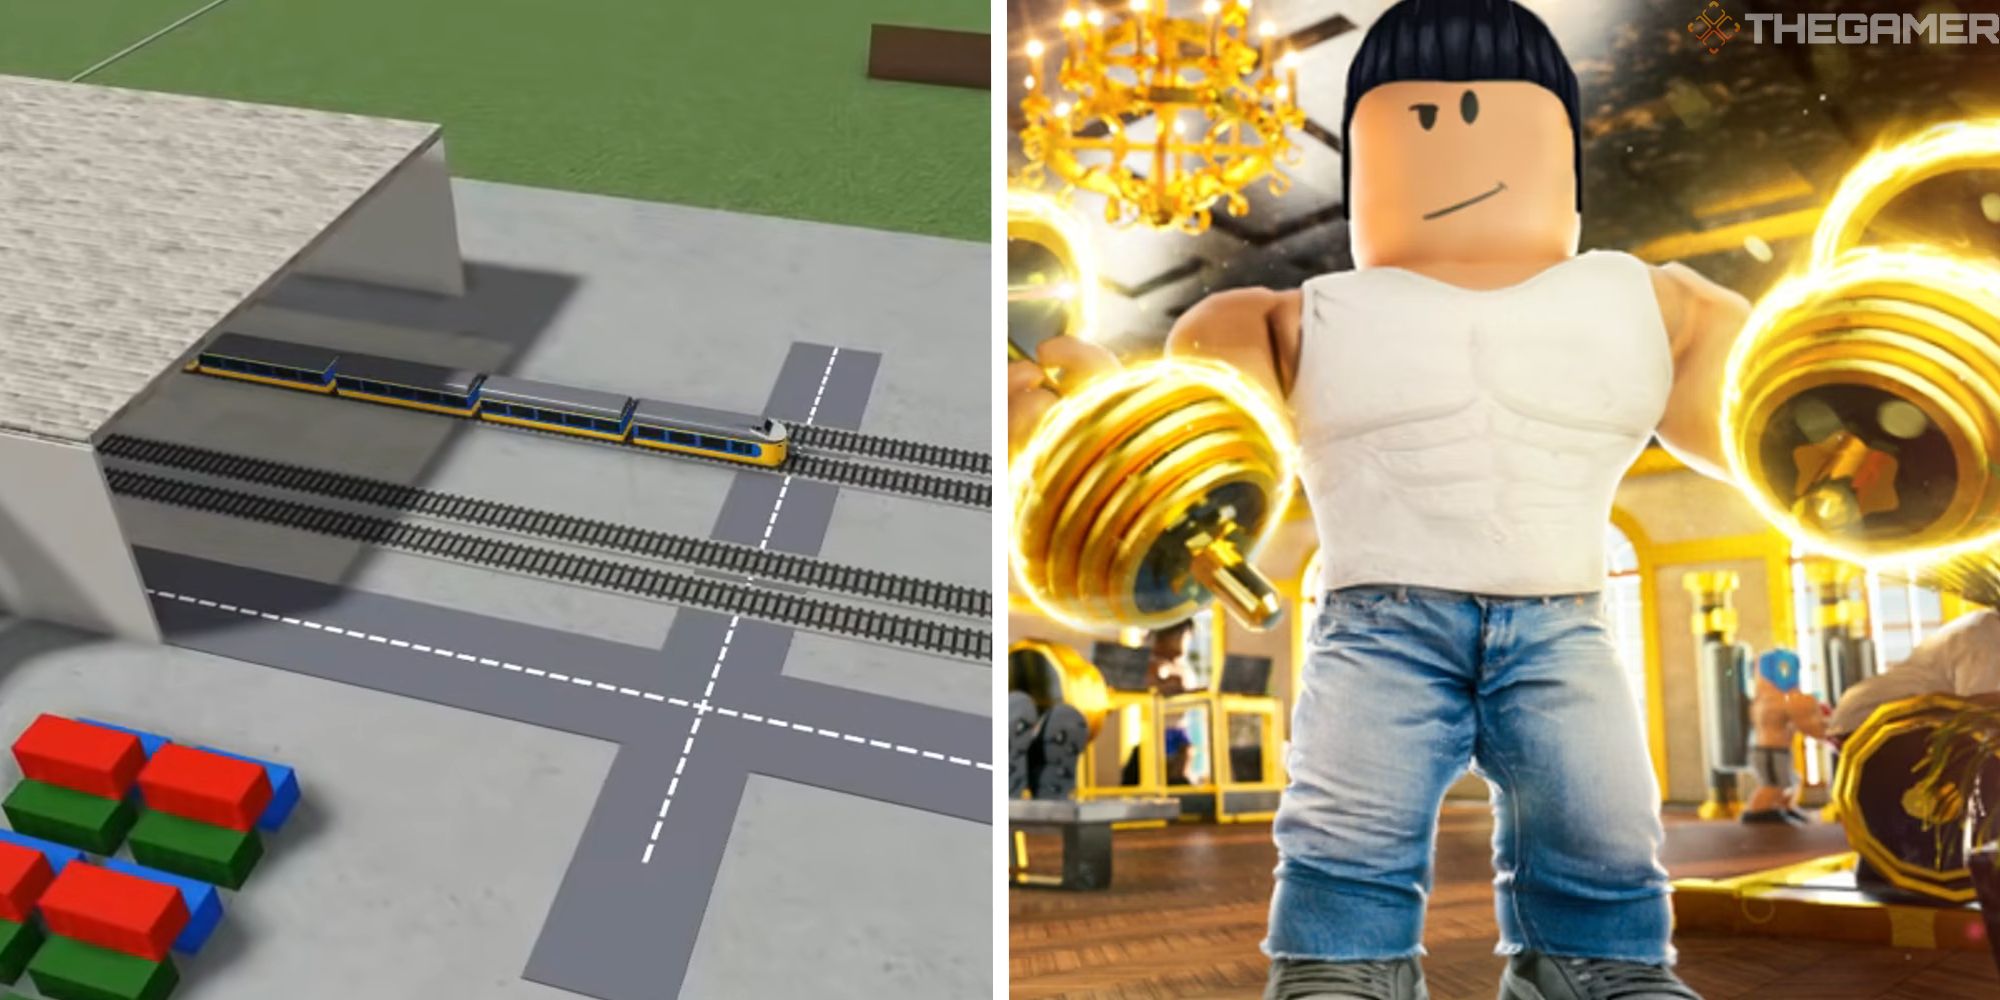 split image showing itty bitty railway next to image of gym tyoon